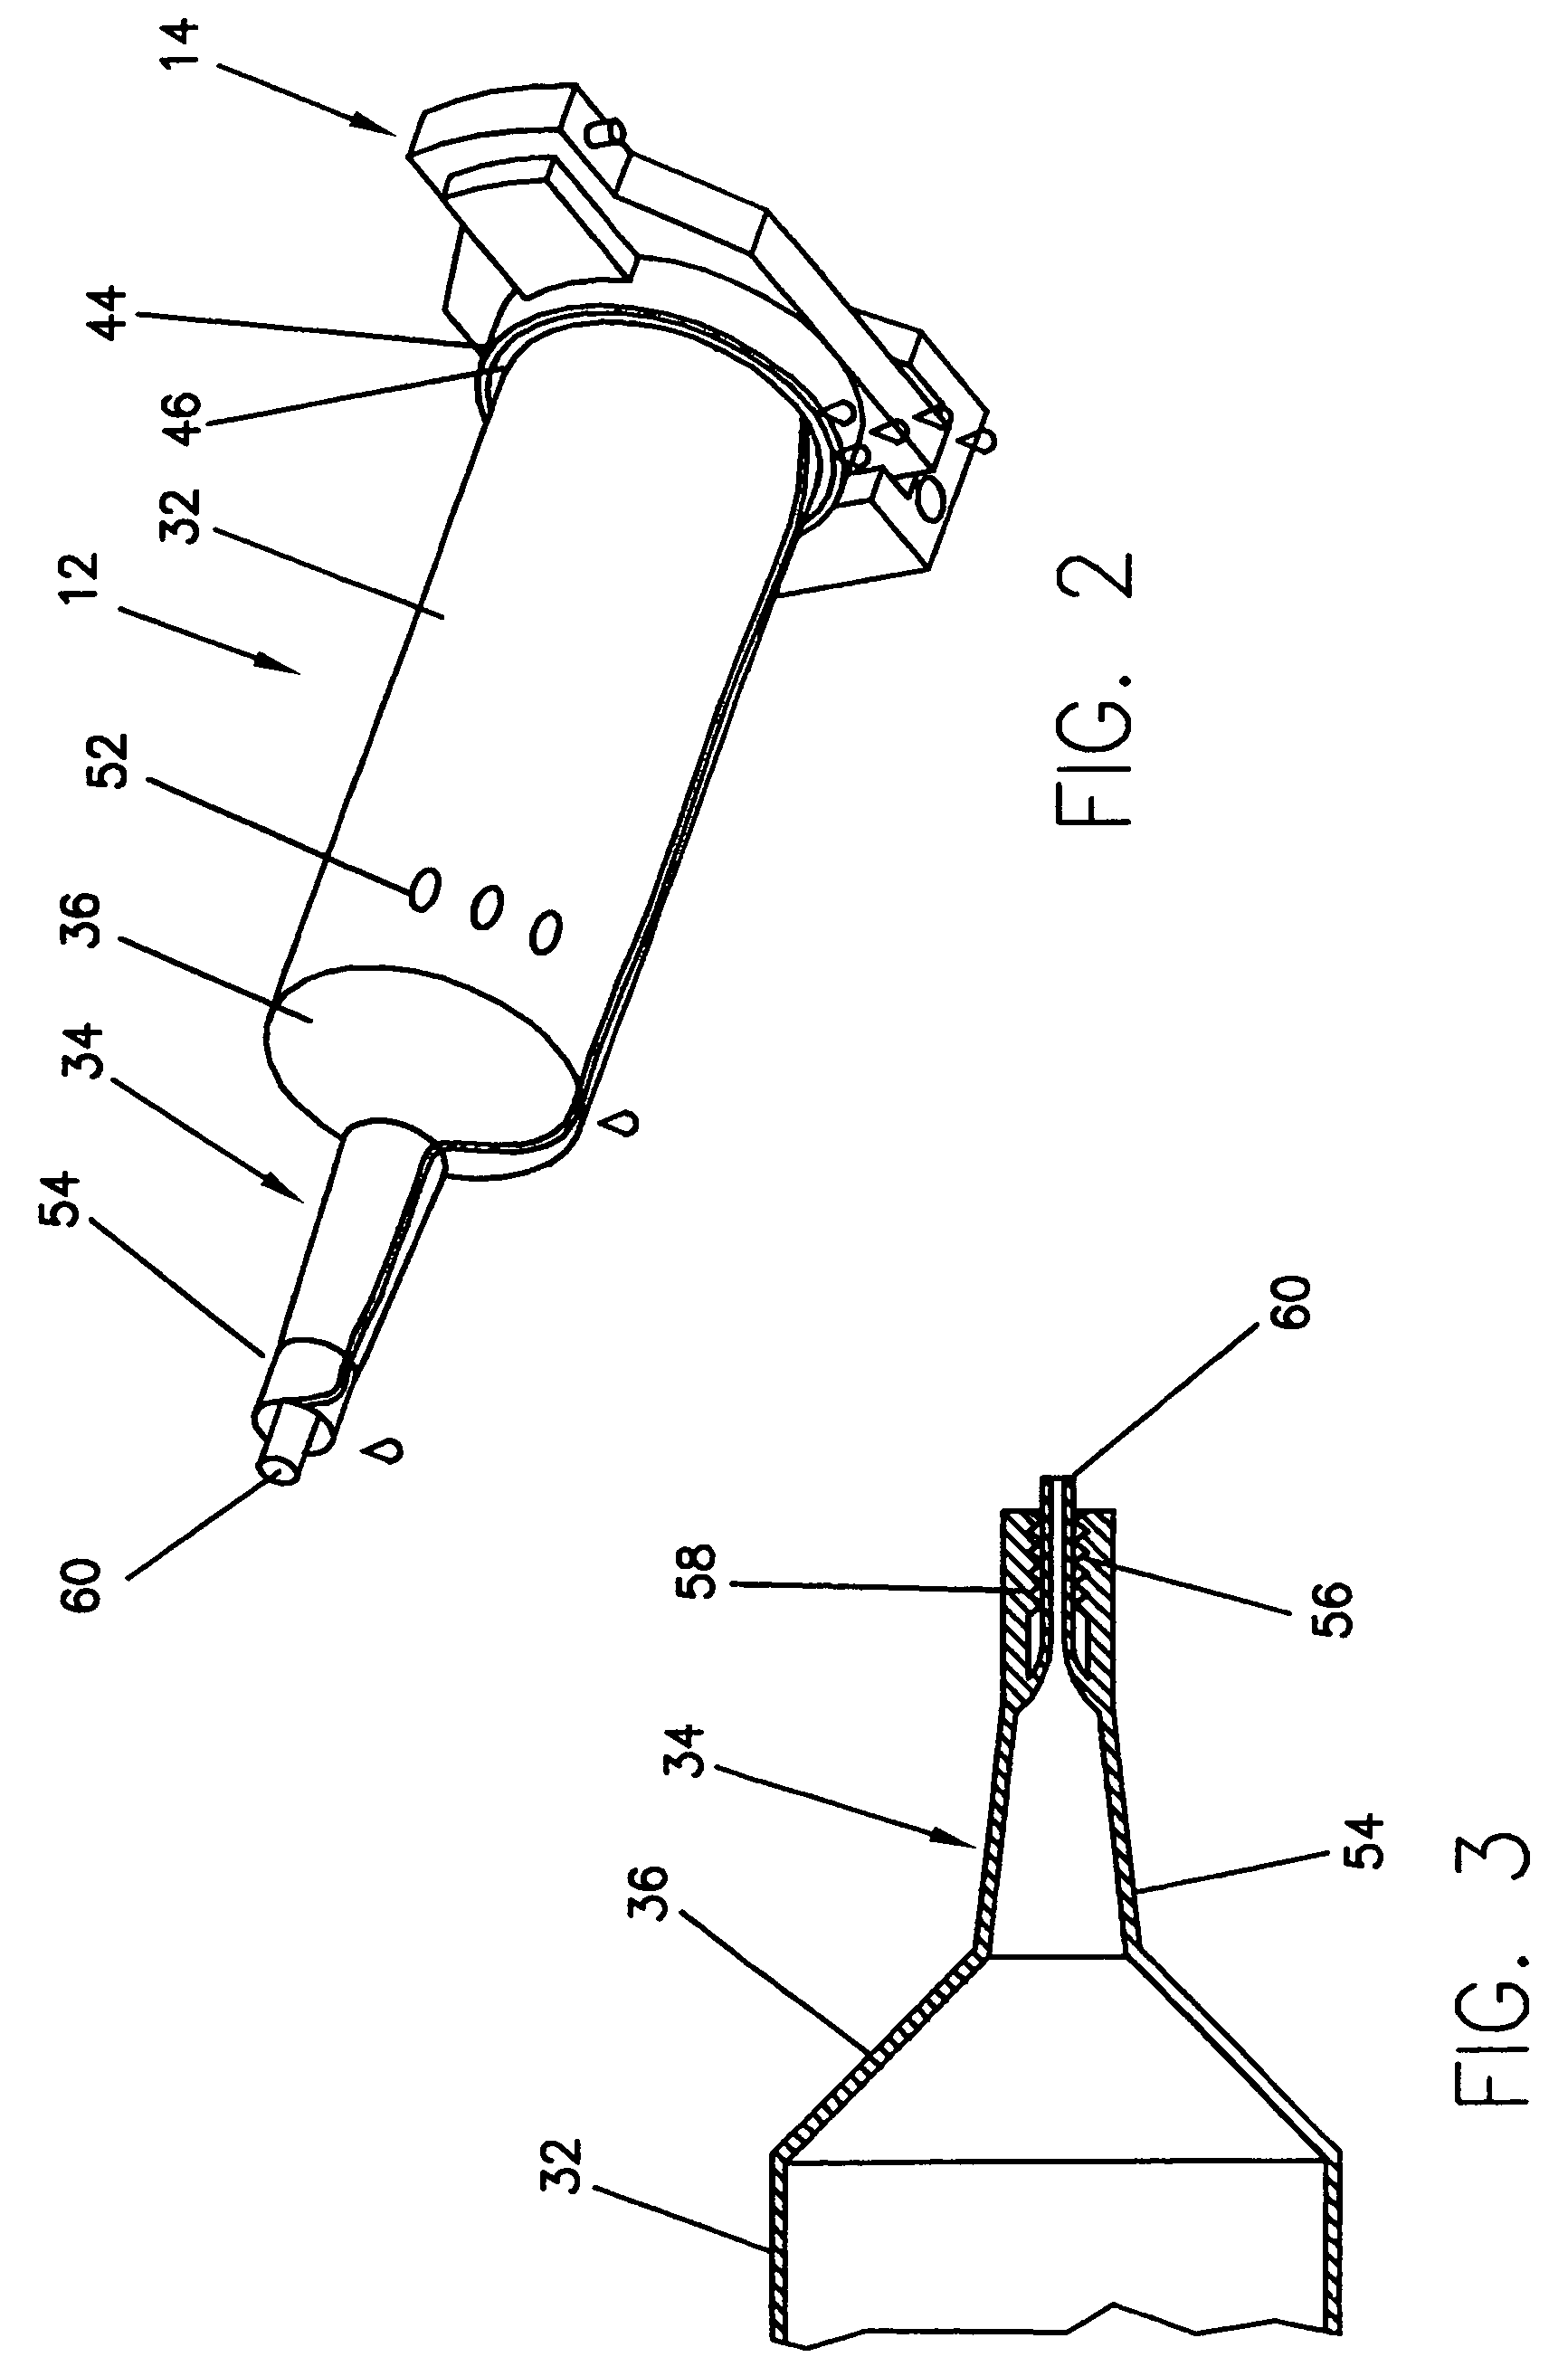 Syringe and syringe plunger for use with medical injectors